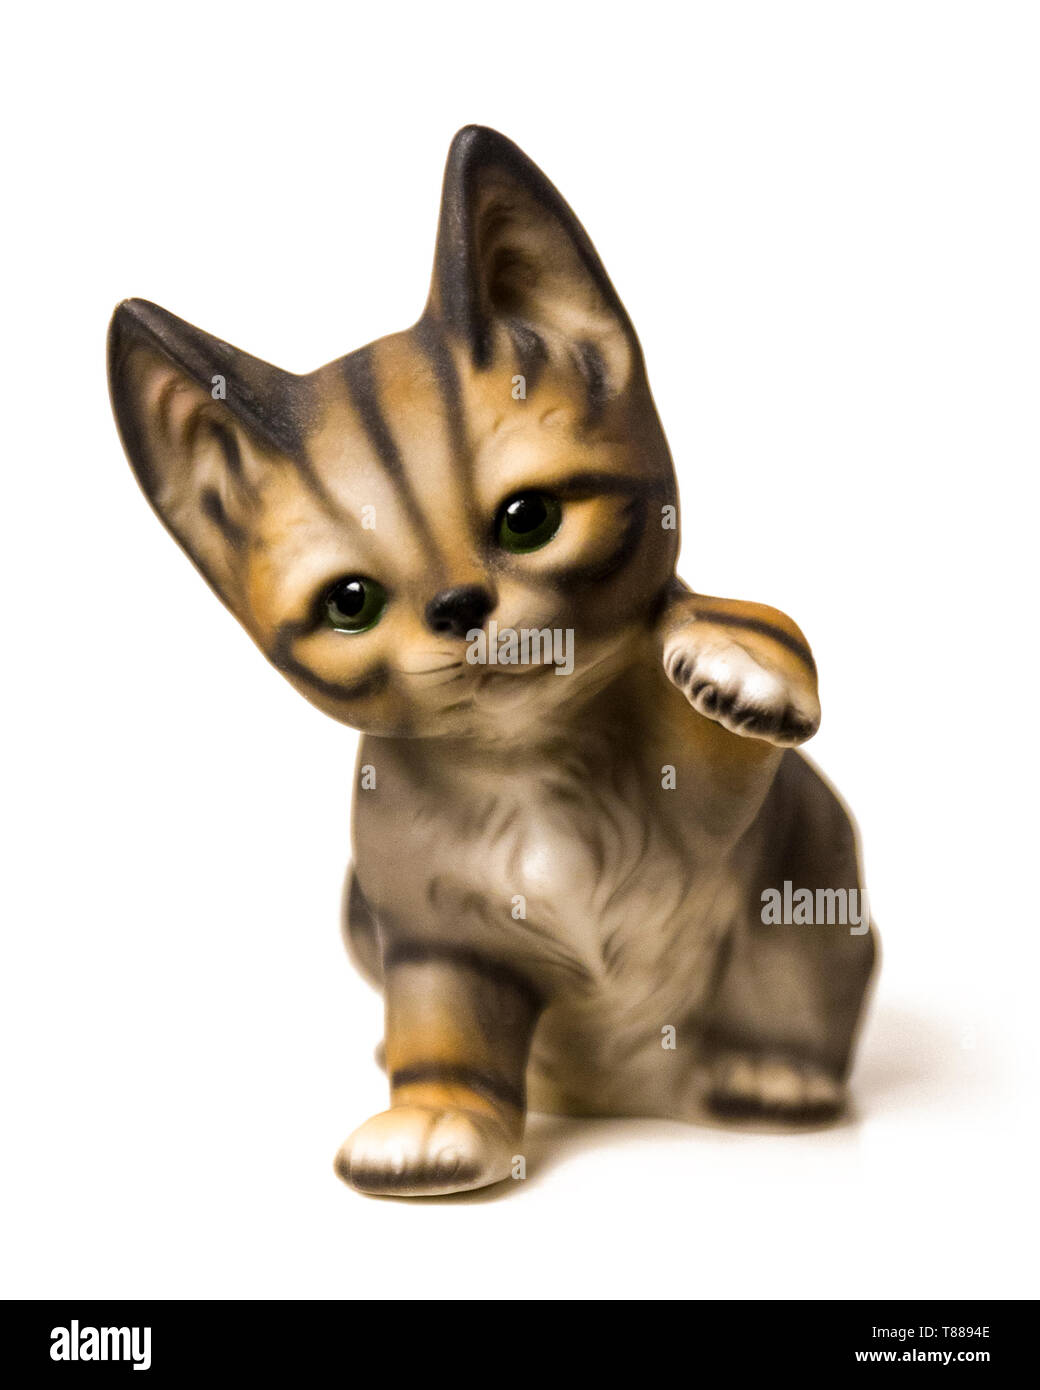 Porcelain kitten lifting it's paw figurine cut out isolated on white background Stock Photo